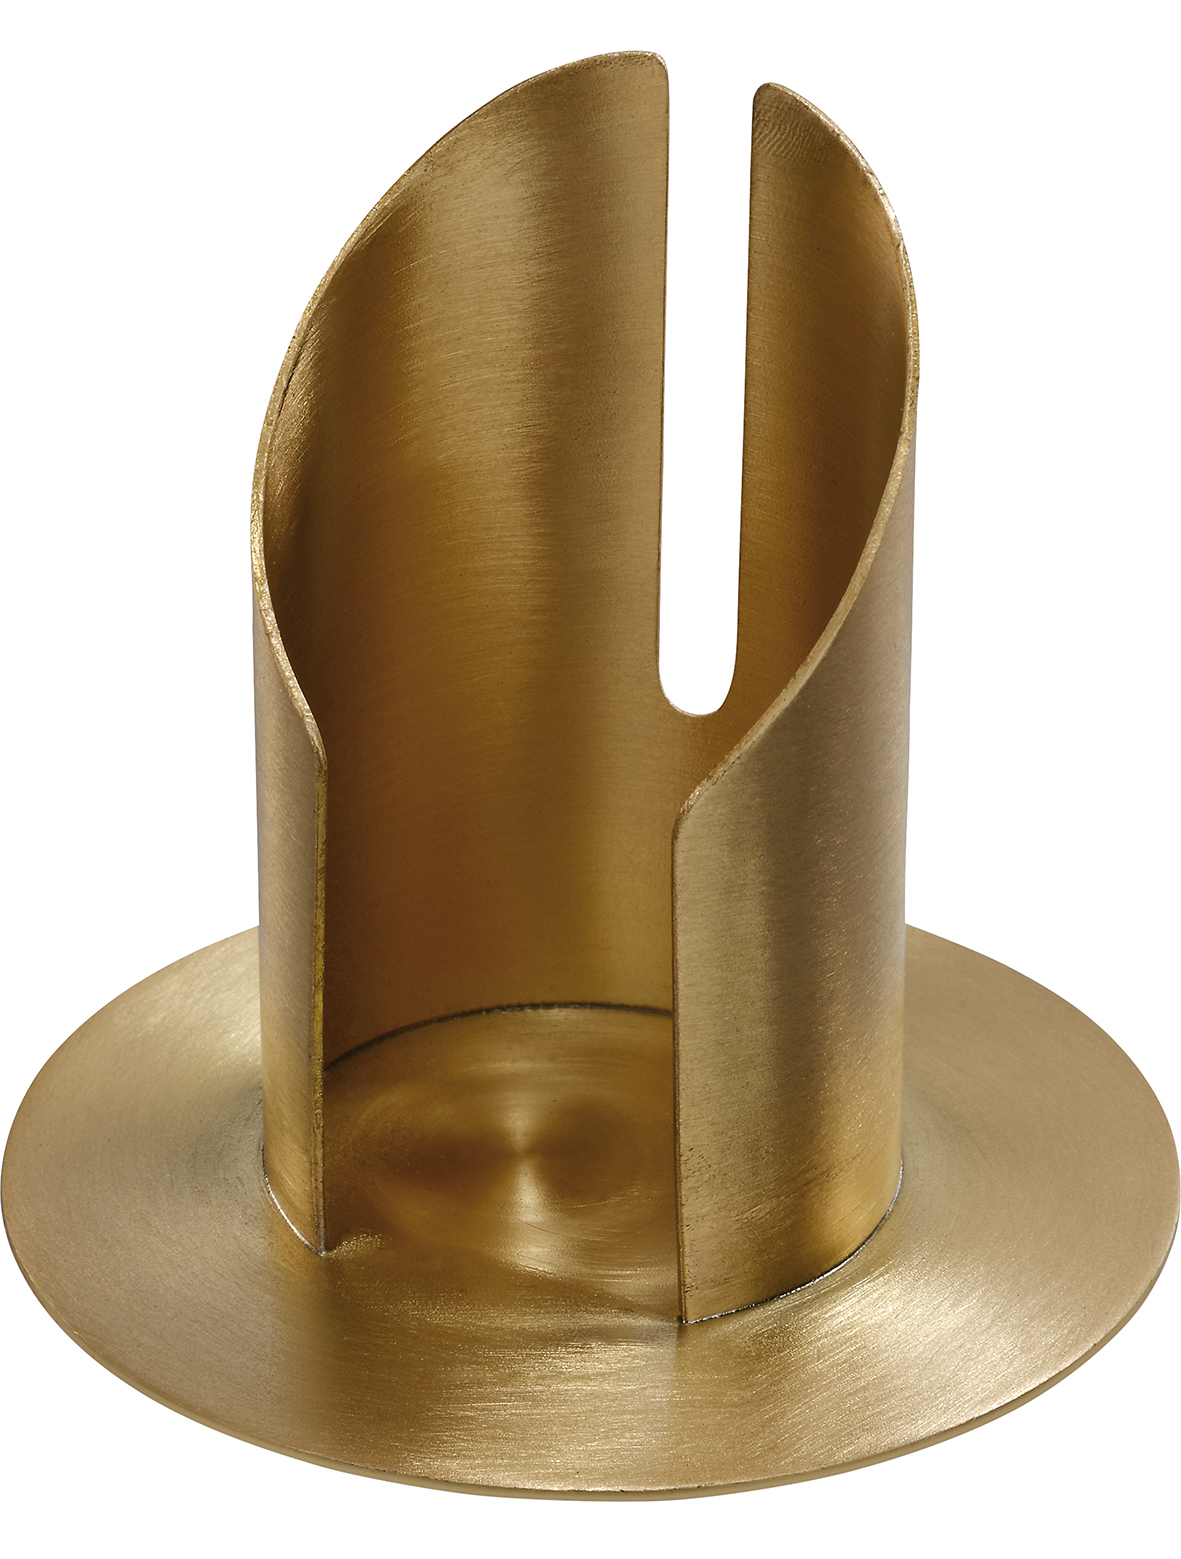 Candle Holder made of Brushed Brass